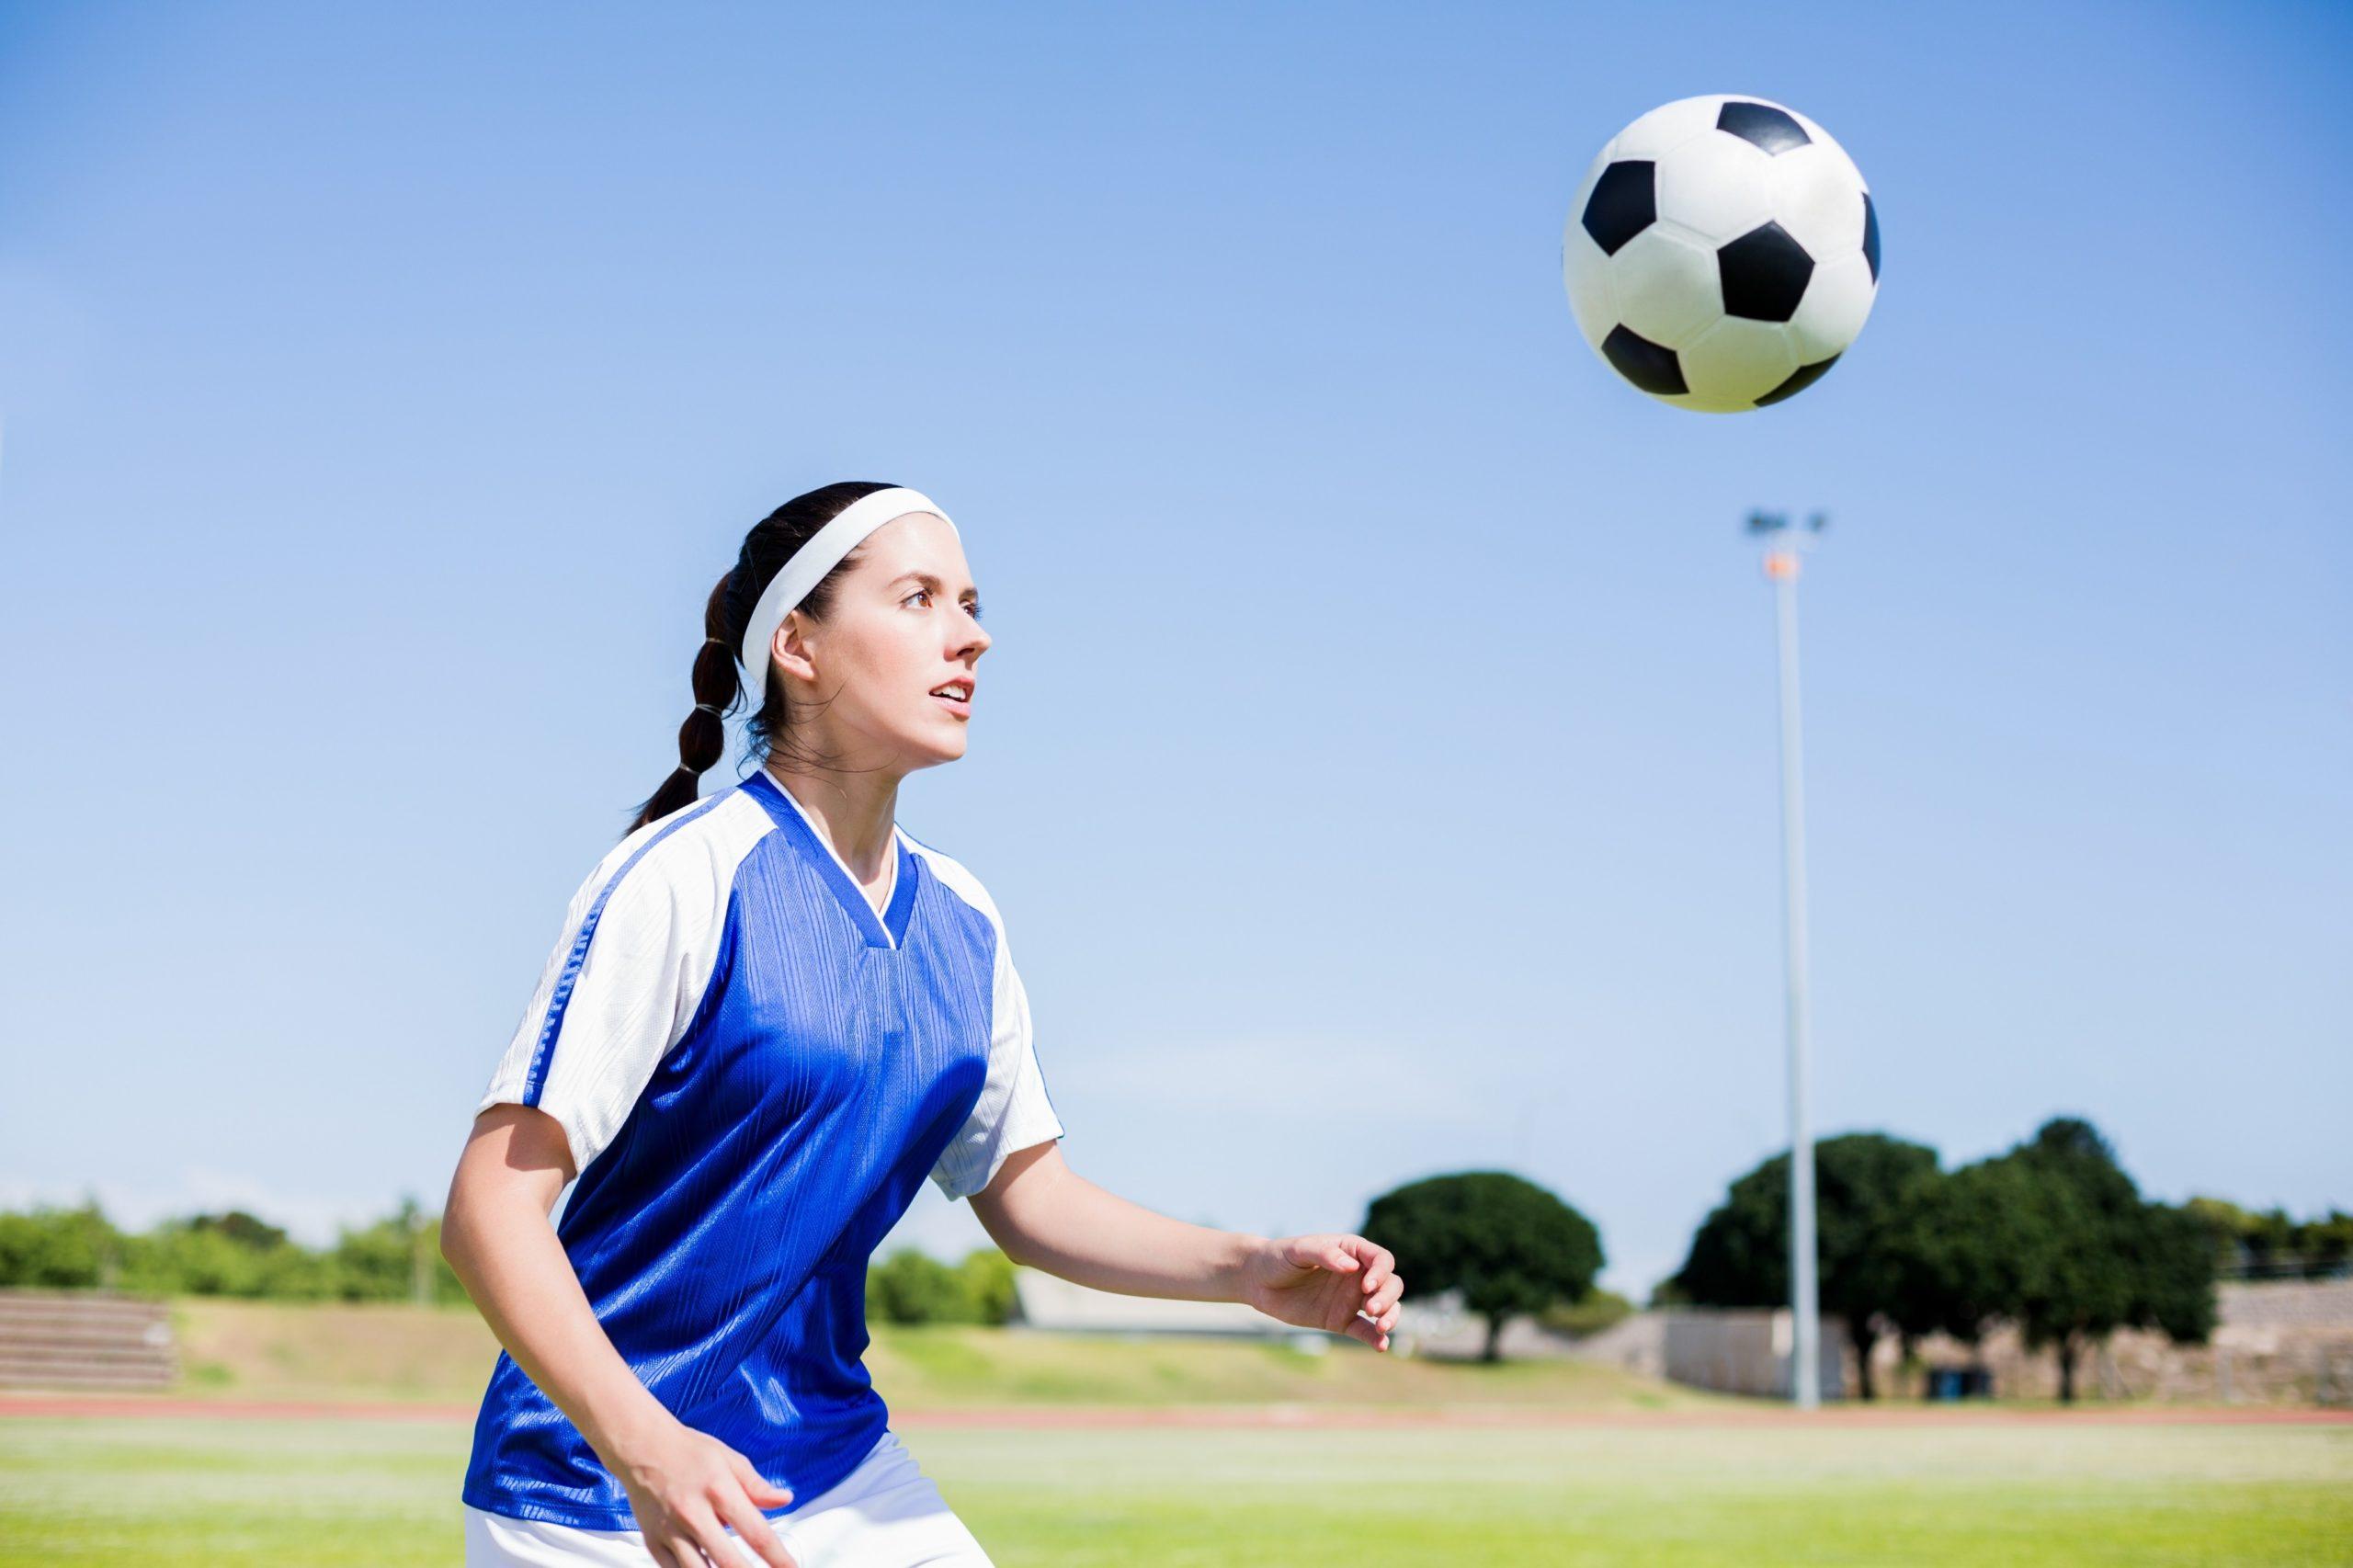 Improve Your Solo Soccer Skills with Fun Drills